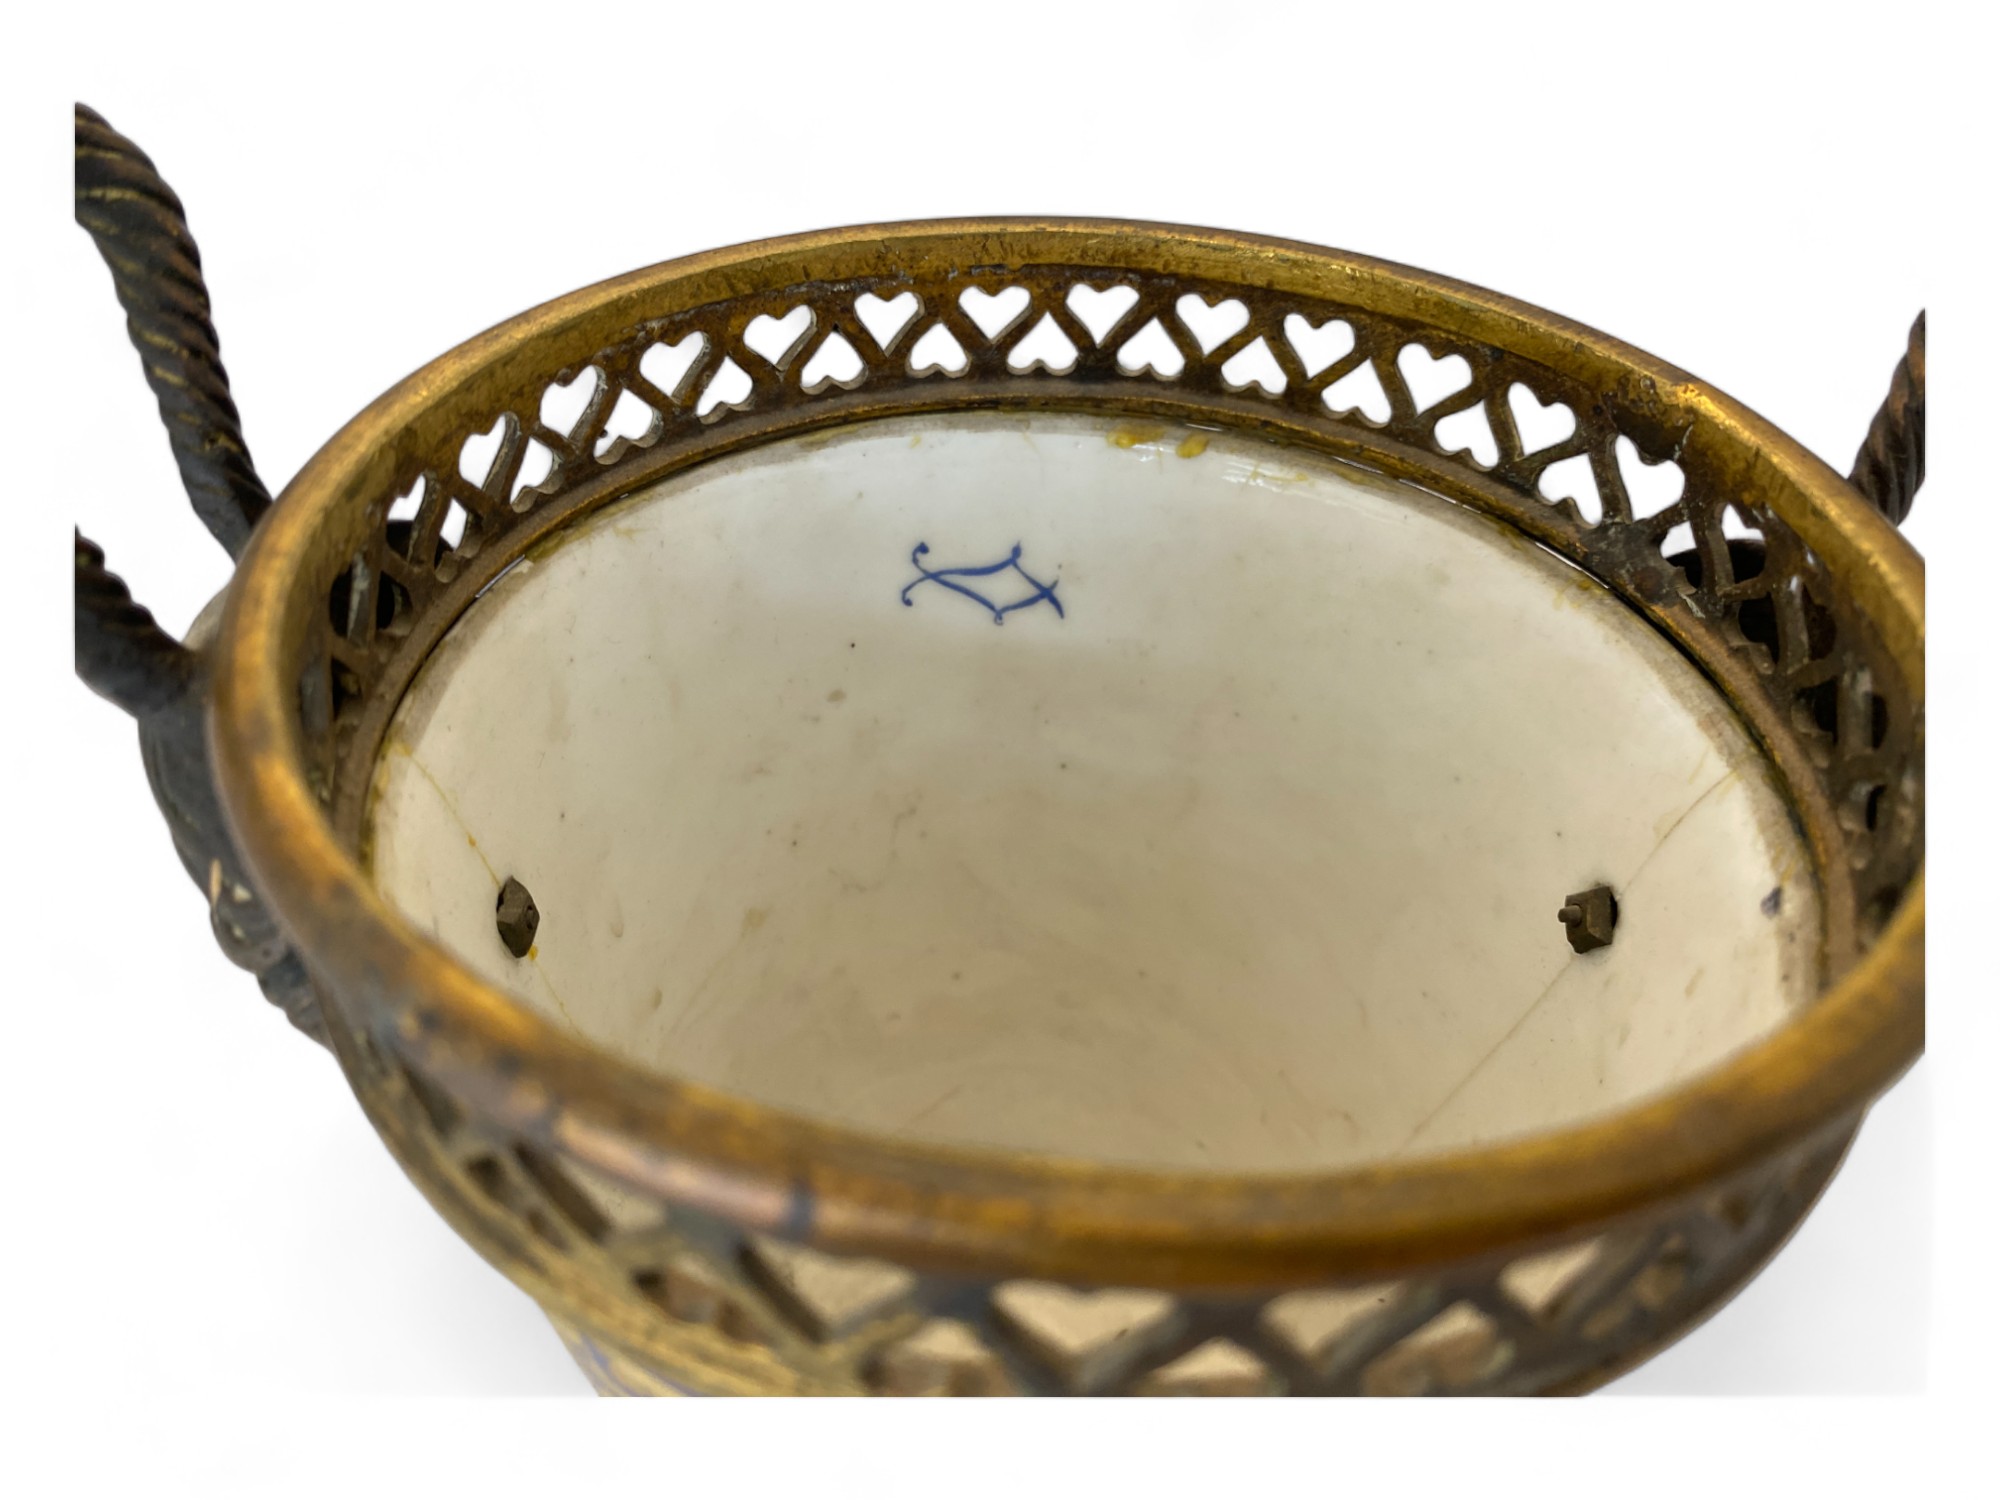 A 19th century Sèvres style porcelain and gilt bronze mounted beau bleu cup and cover - Image 9 of 10